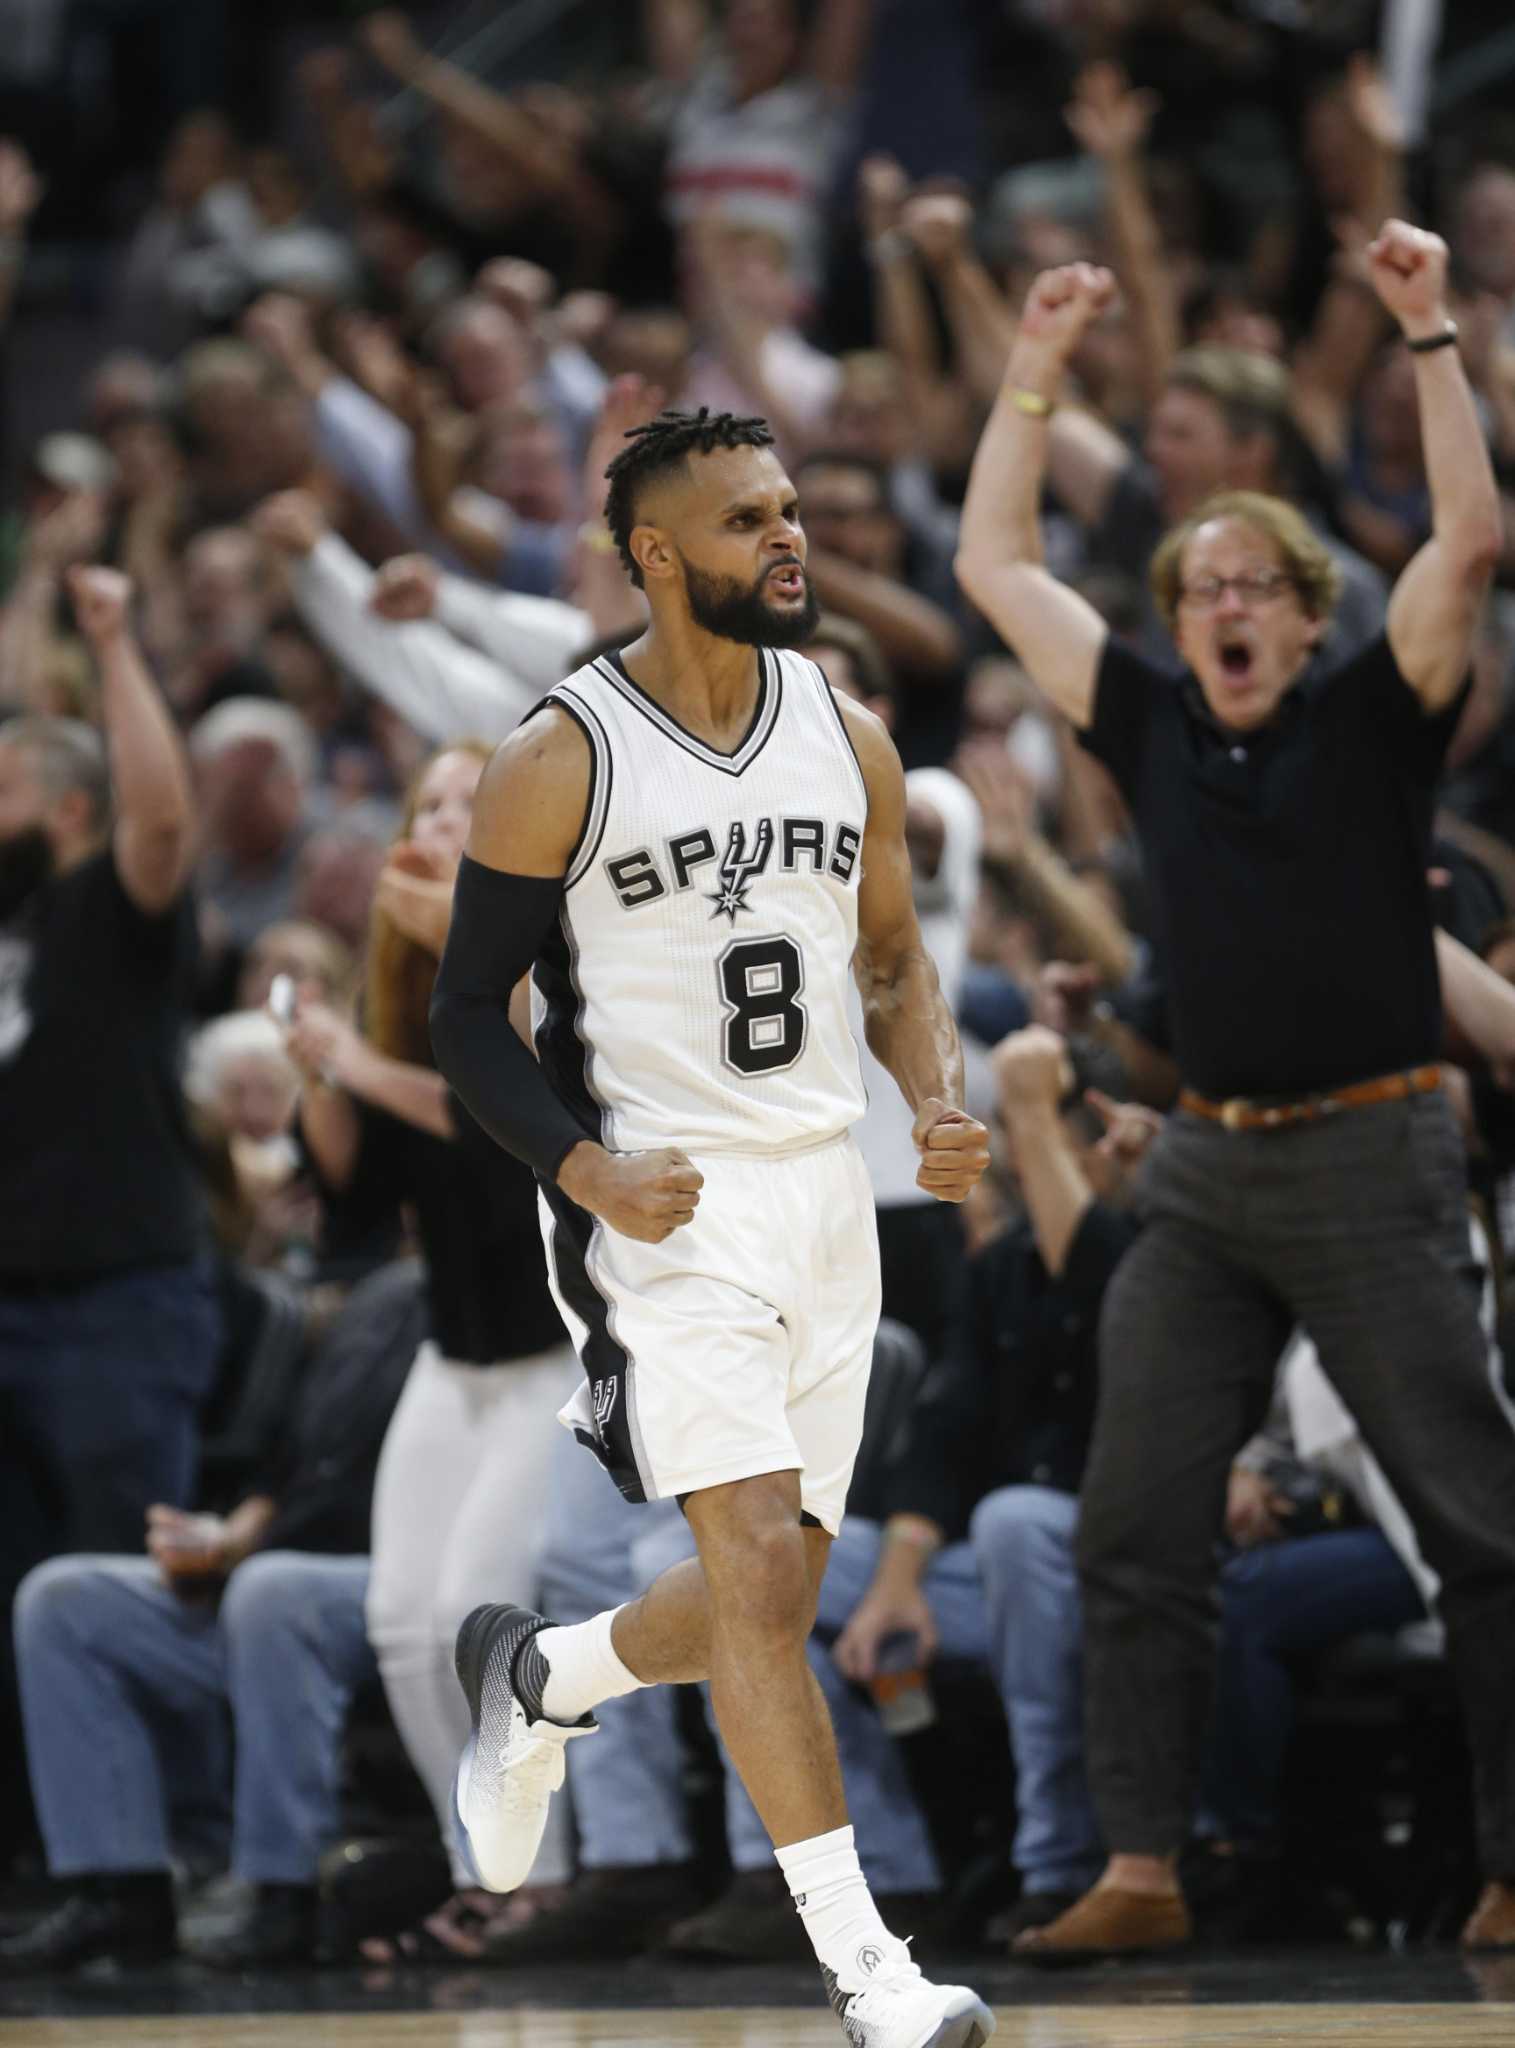 Spurs' Patty Mills corrects 'dufus' meme page after wife Alyssa is